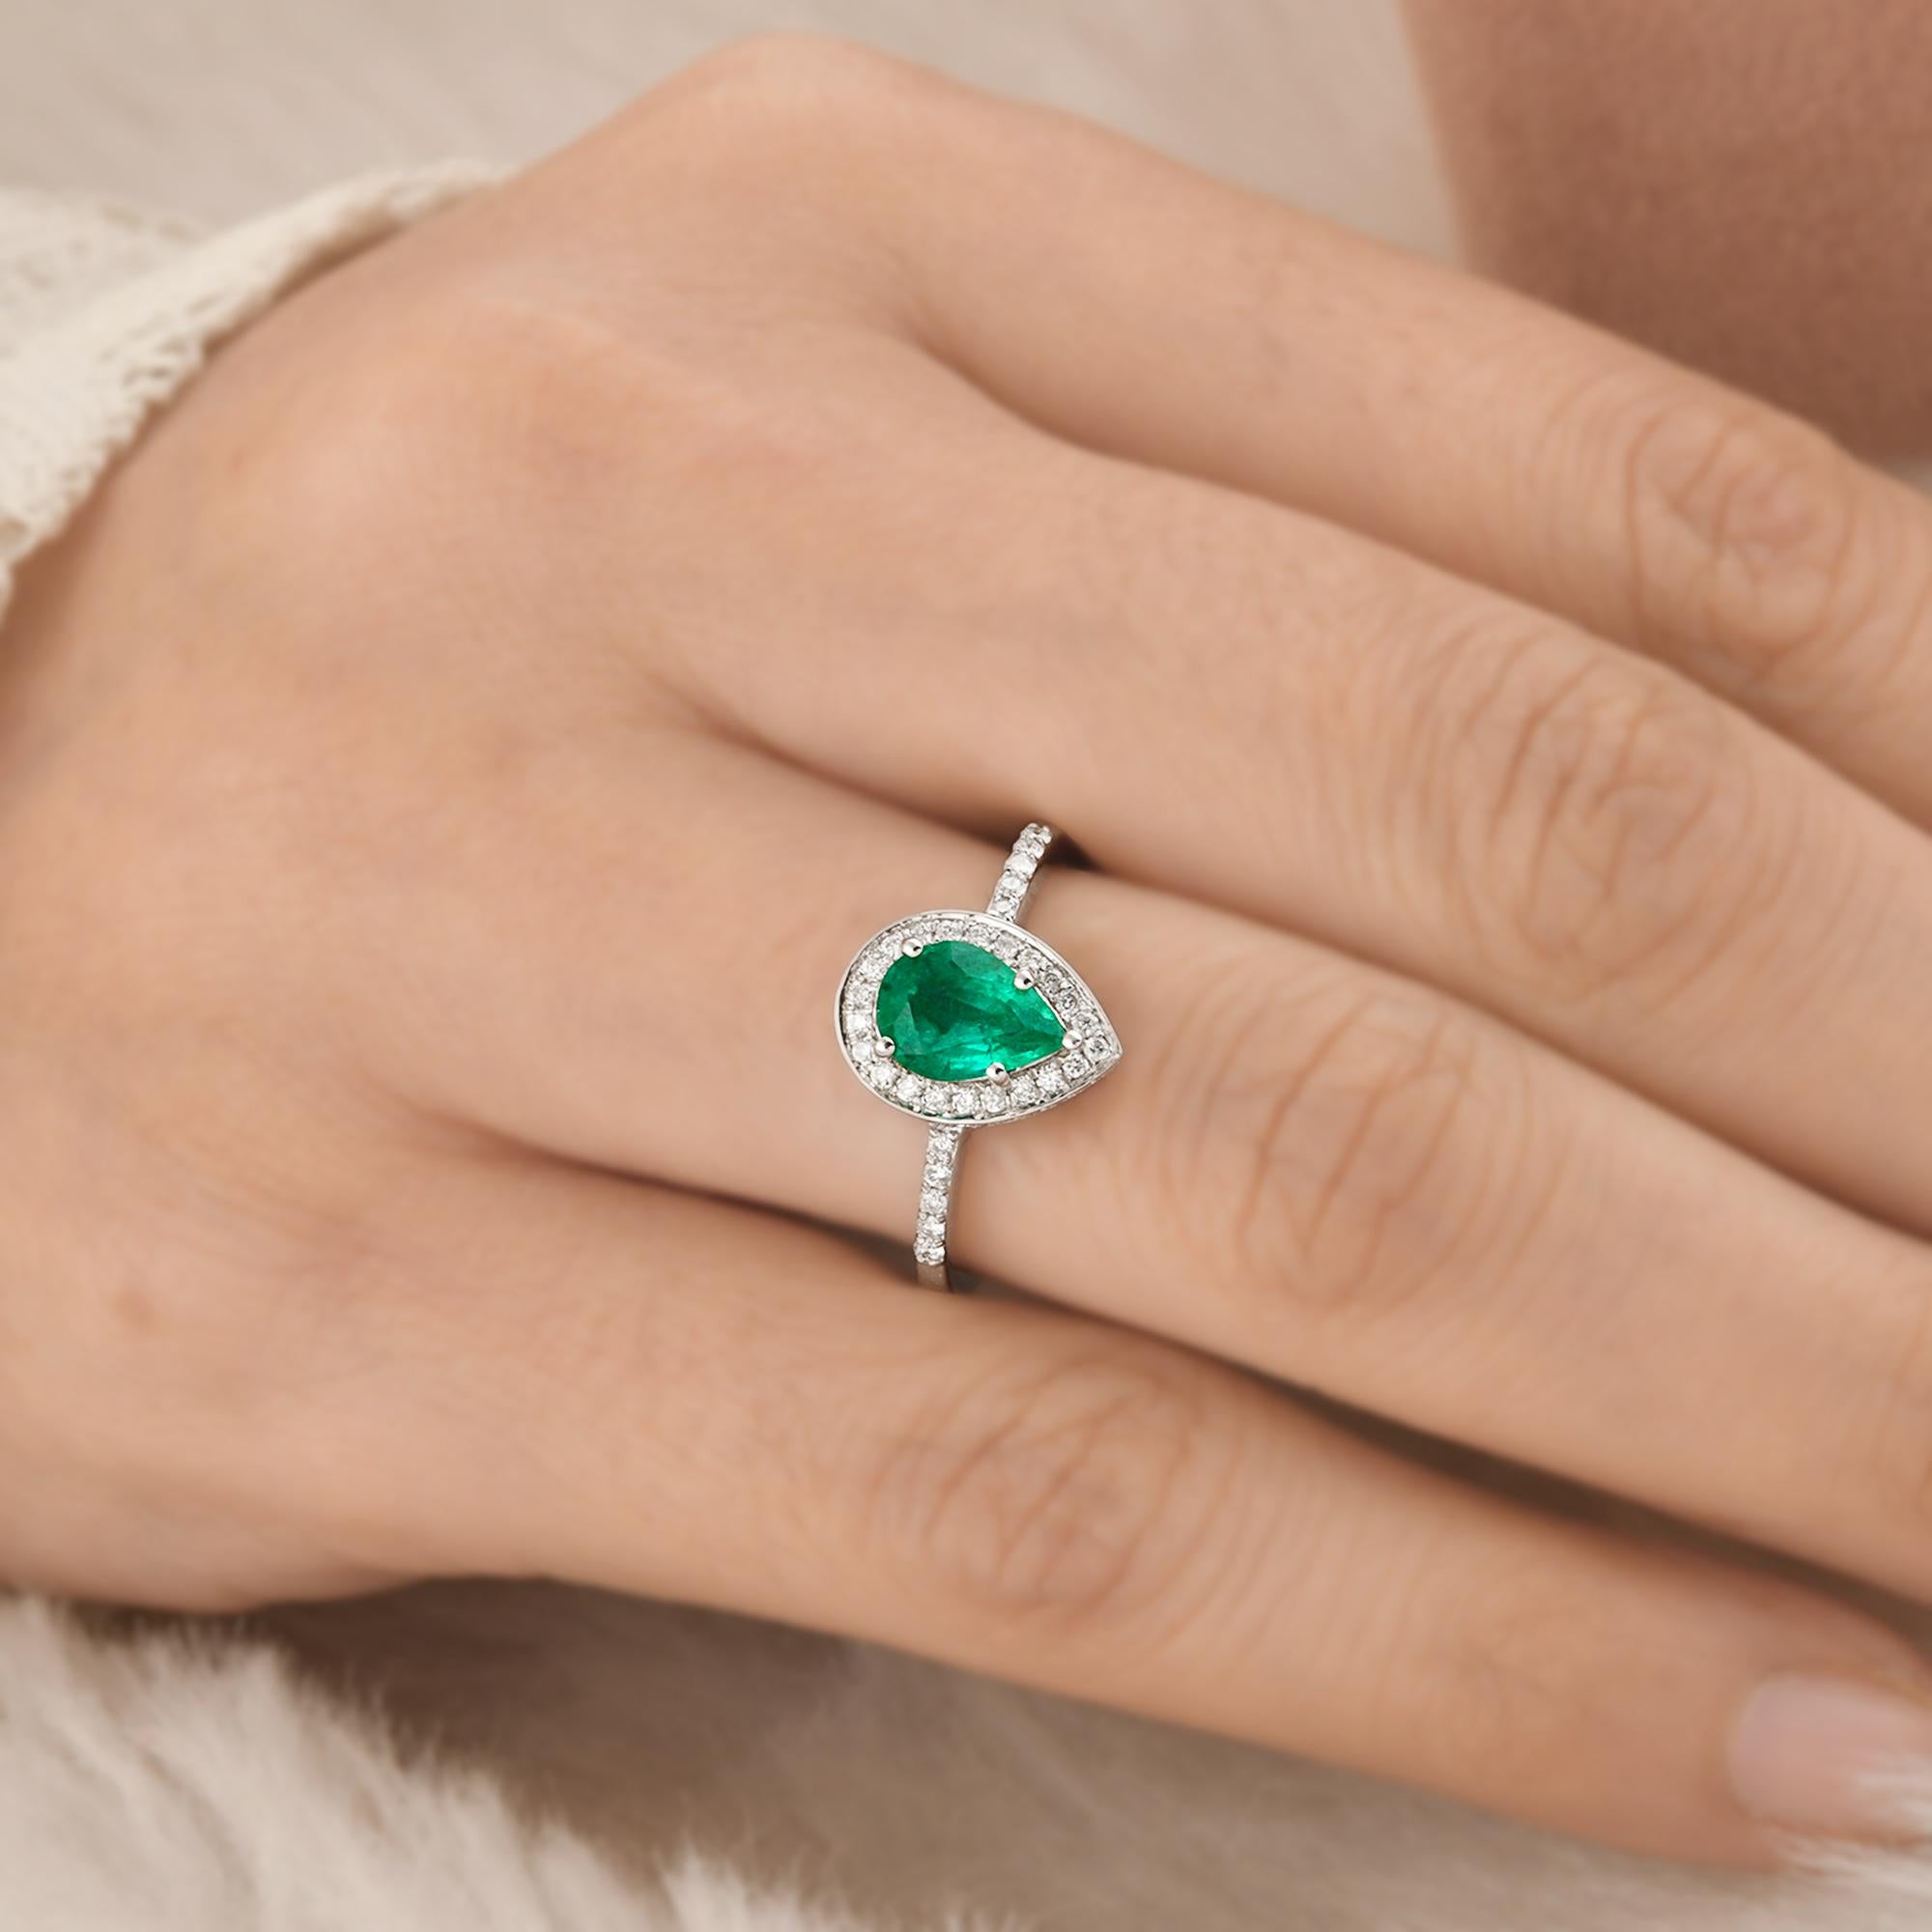 Modern 1.40 Tcw Pear Natural Emerald Gemstone Halo Ring Diamond 18k White Gold Jewelry For Sale